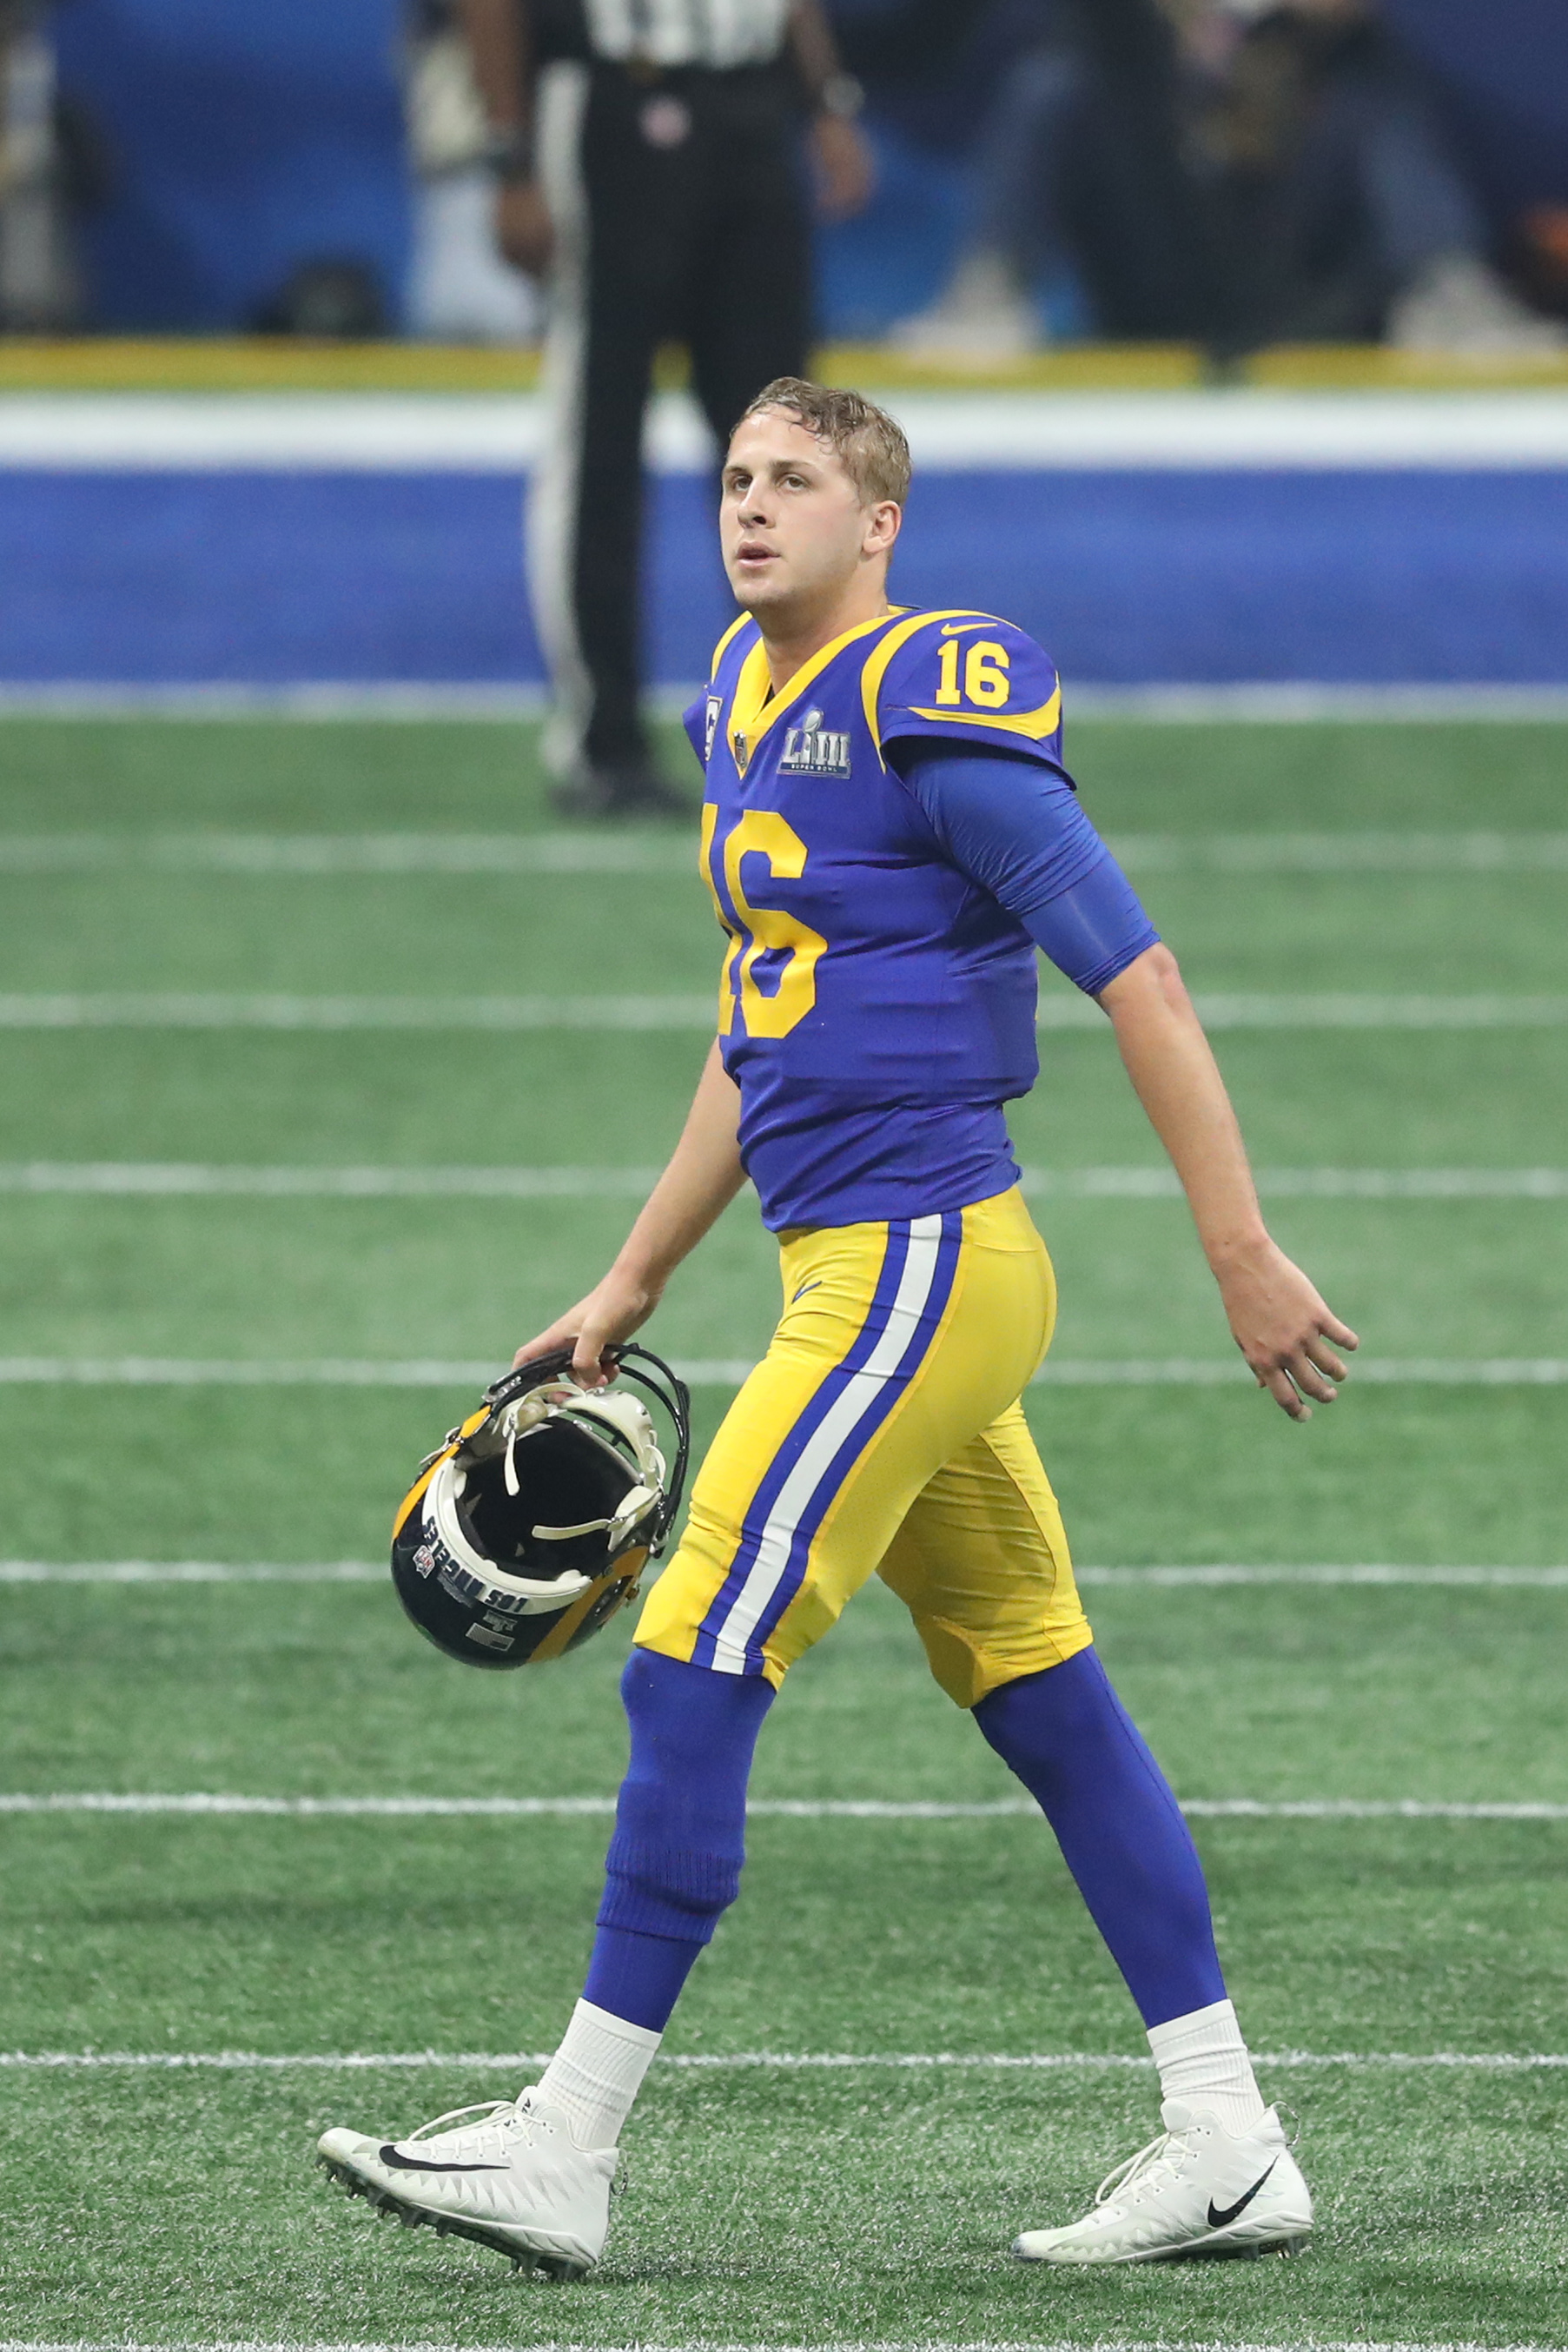 Los Angeles Rams QB Jared Goff walks off the field after throwing an interception against the New England Patriots during Super Bowl LIII, Feb. 3, 2019.